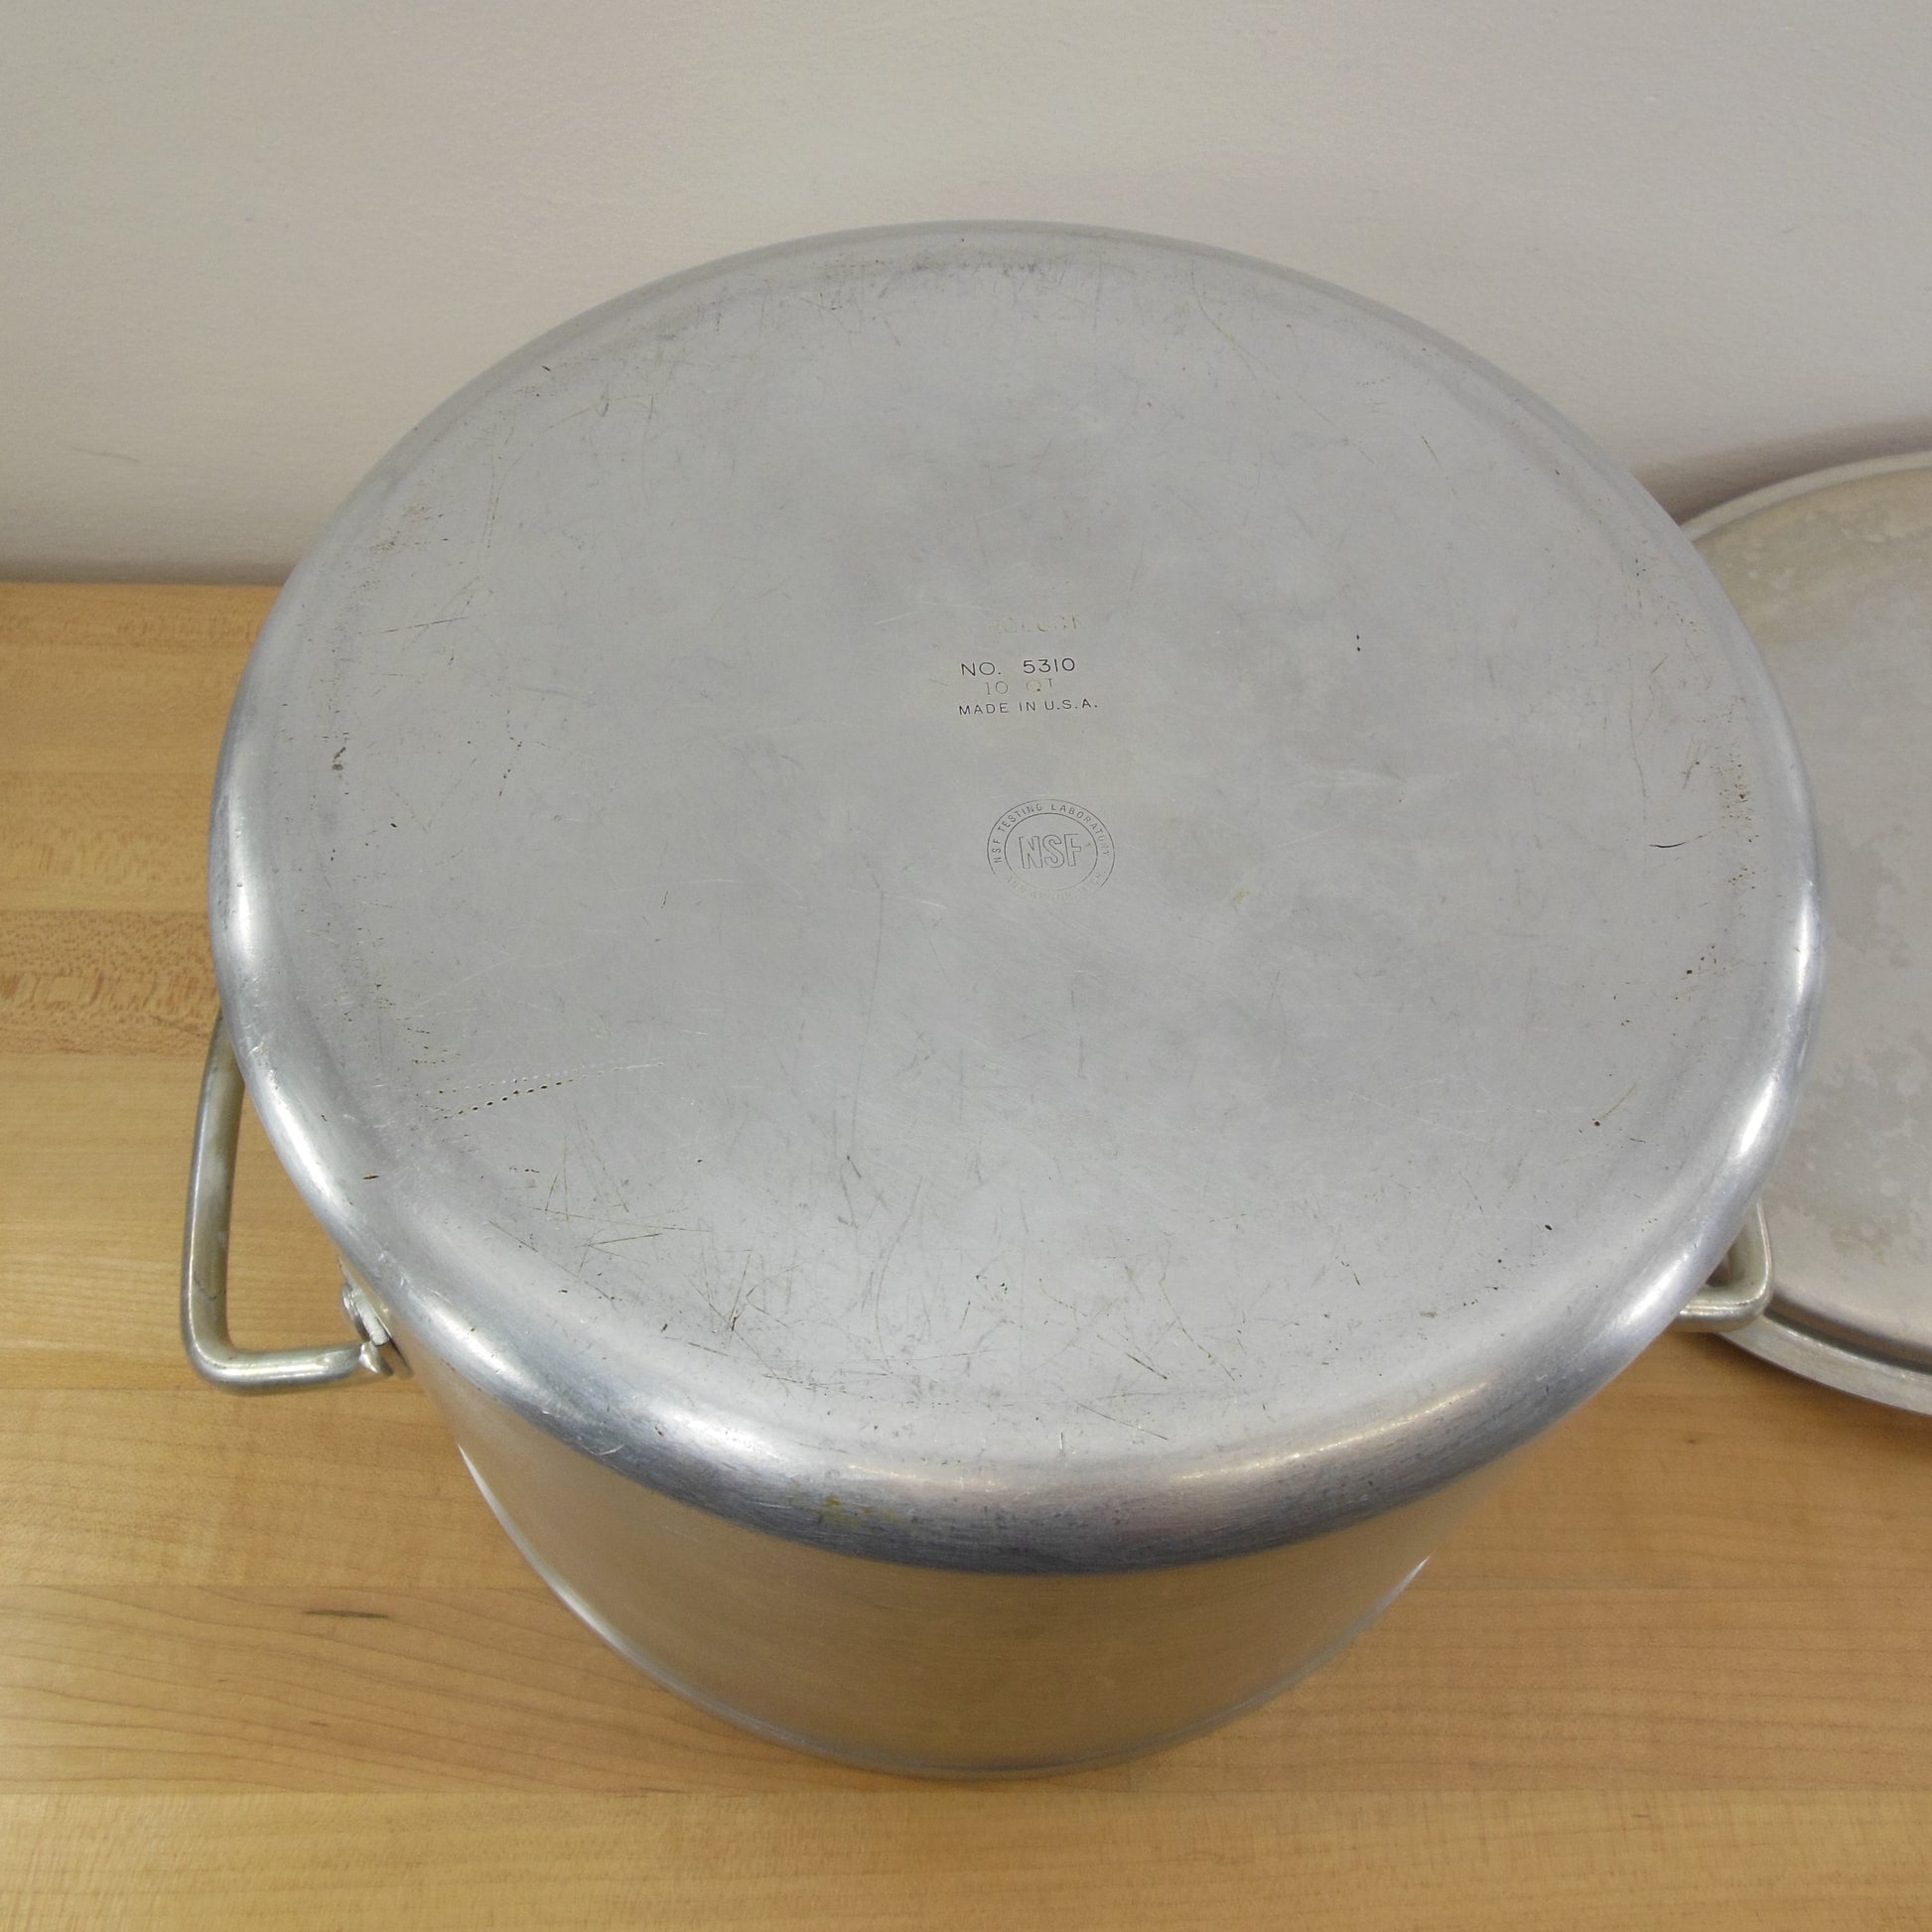 Leyse USA NSF Commercial Aluminum 10 Quart Stock Pot with Lid